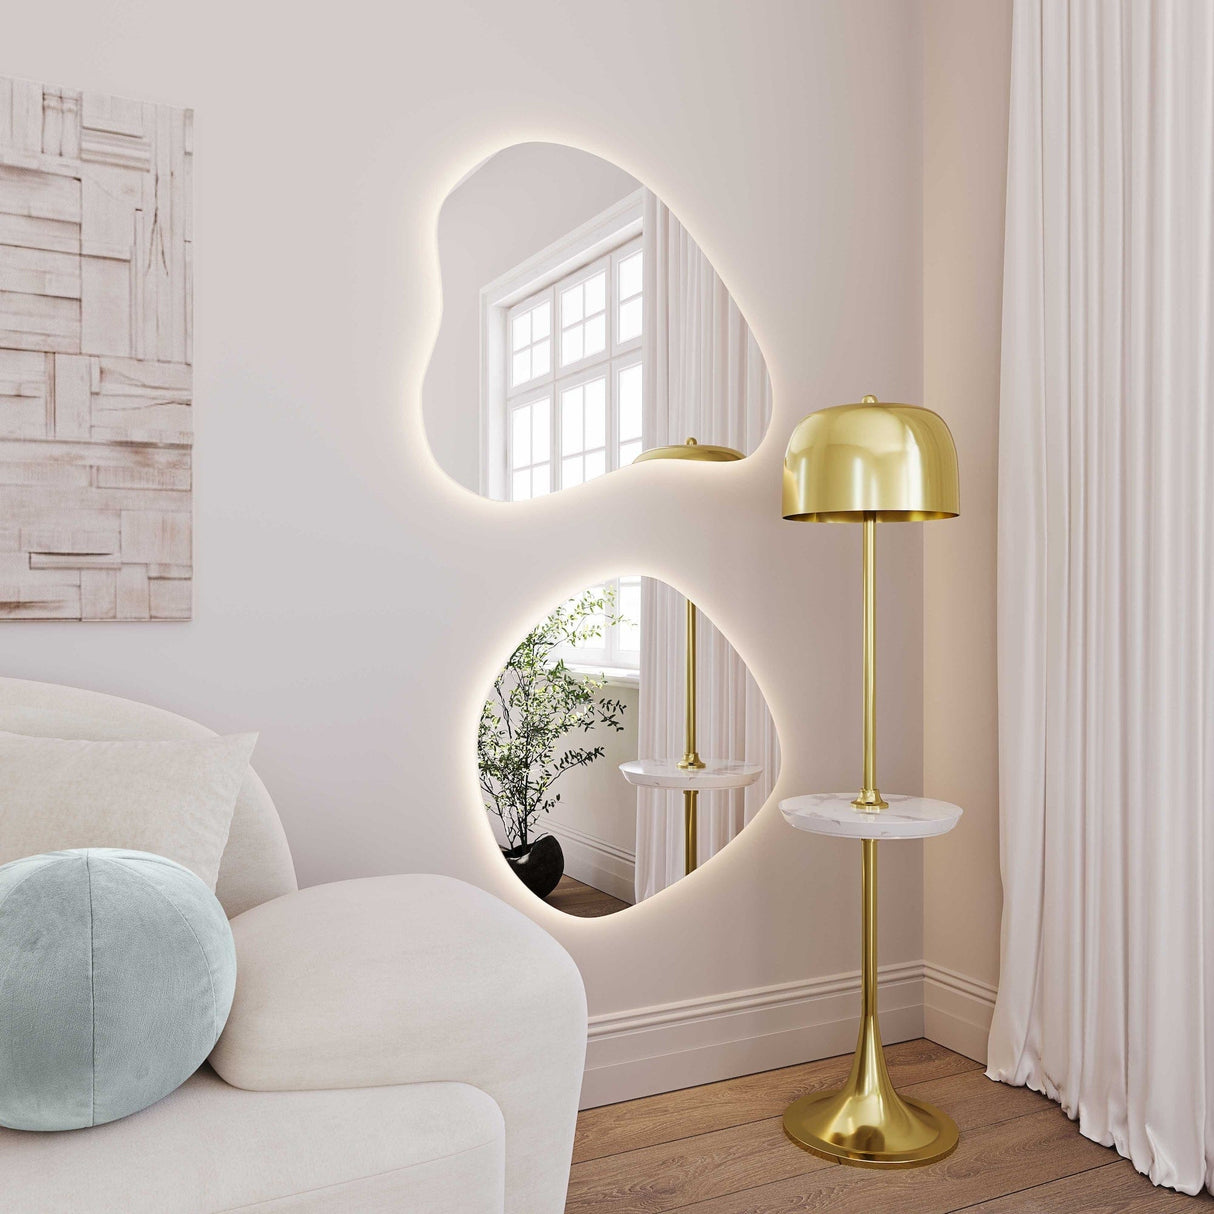 Candelabra Home Phoebe LED Wall Mirror Mirrors